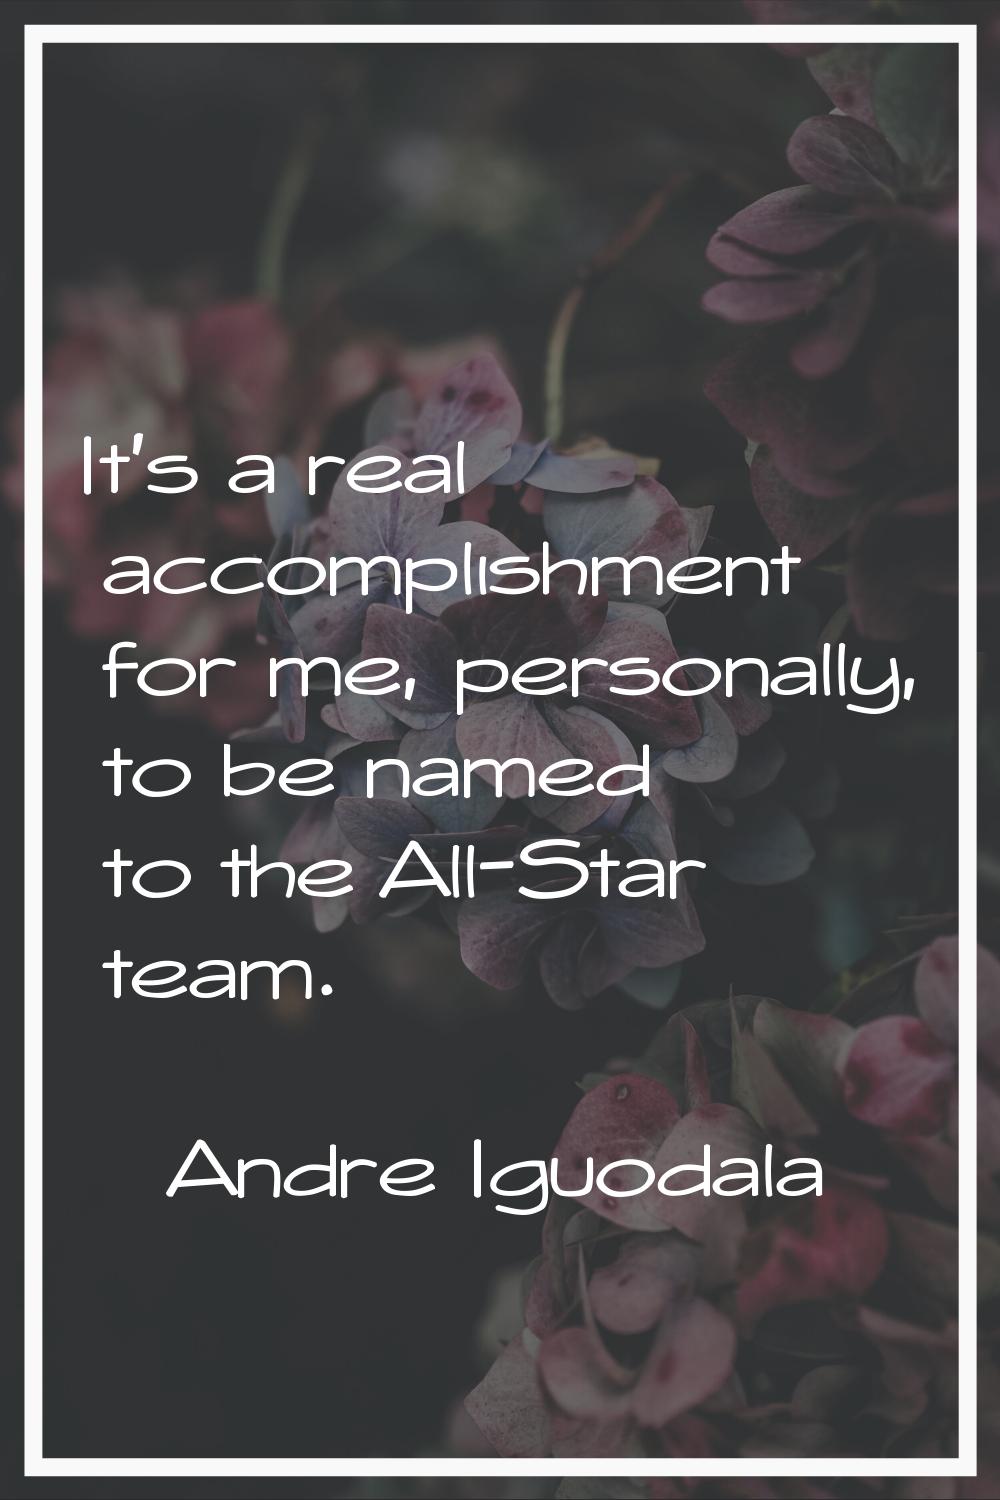 It's a real accomplishment for me, personally, to be named to the All-Star team.